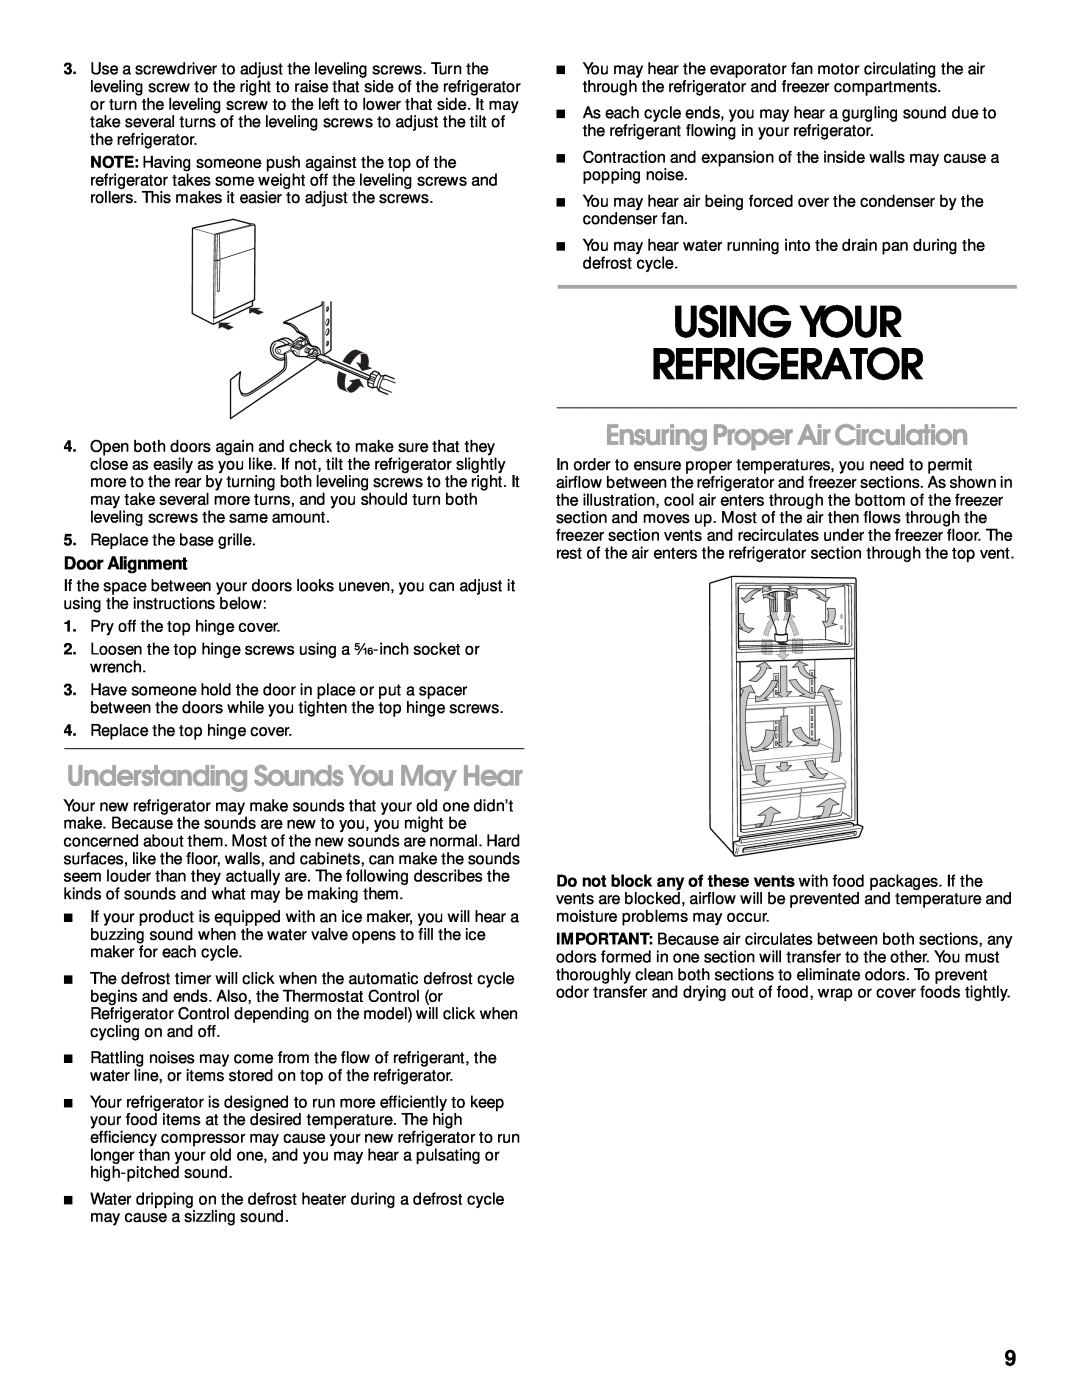 Whirlpool ST21PKXJW00 manual Using Your Refrigerator, Understanding Sounds You May Hear, Ensuring Proper Air Circulation 